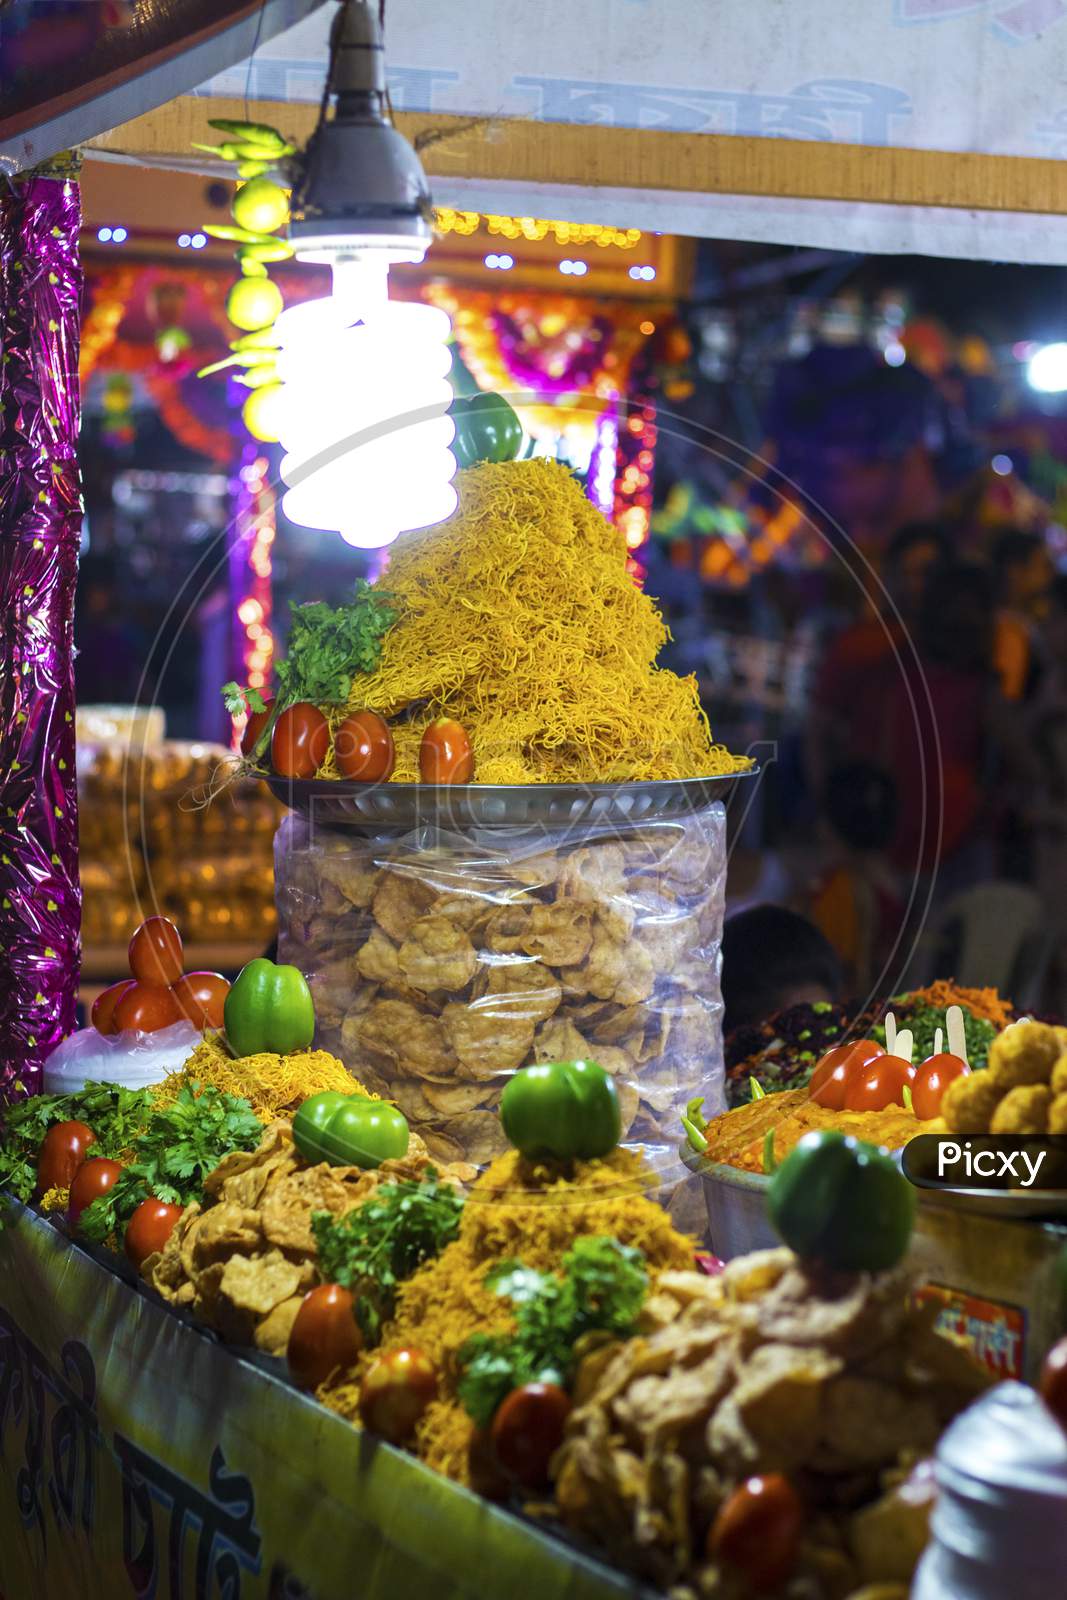 India's One Of The Most Popular Street Food Papri Chaat,Ingredients Of Chaat Arranged At Stall For Sale